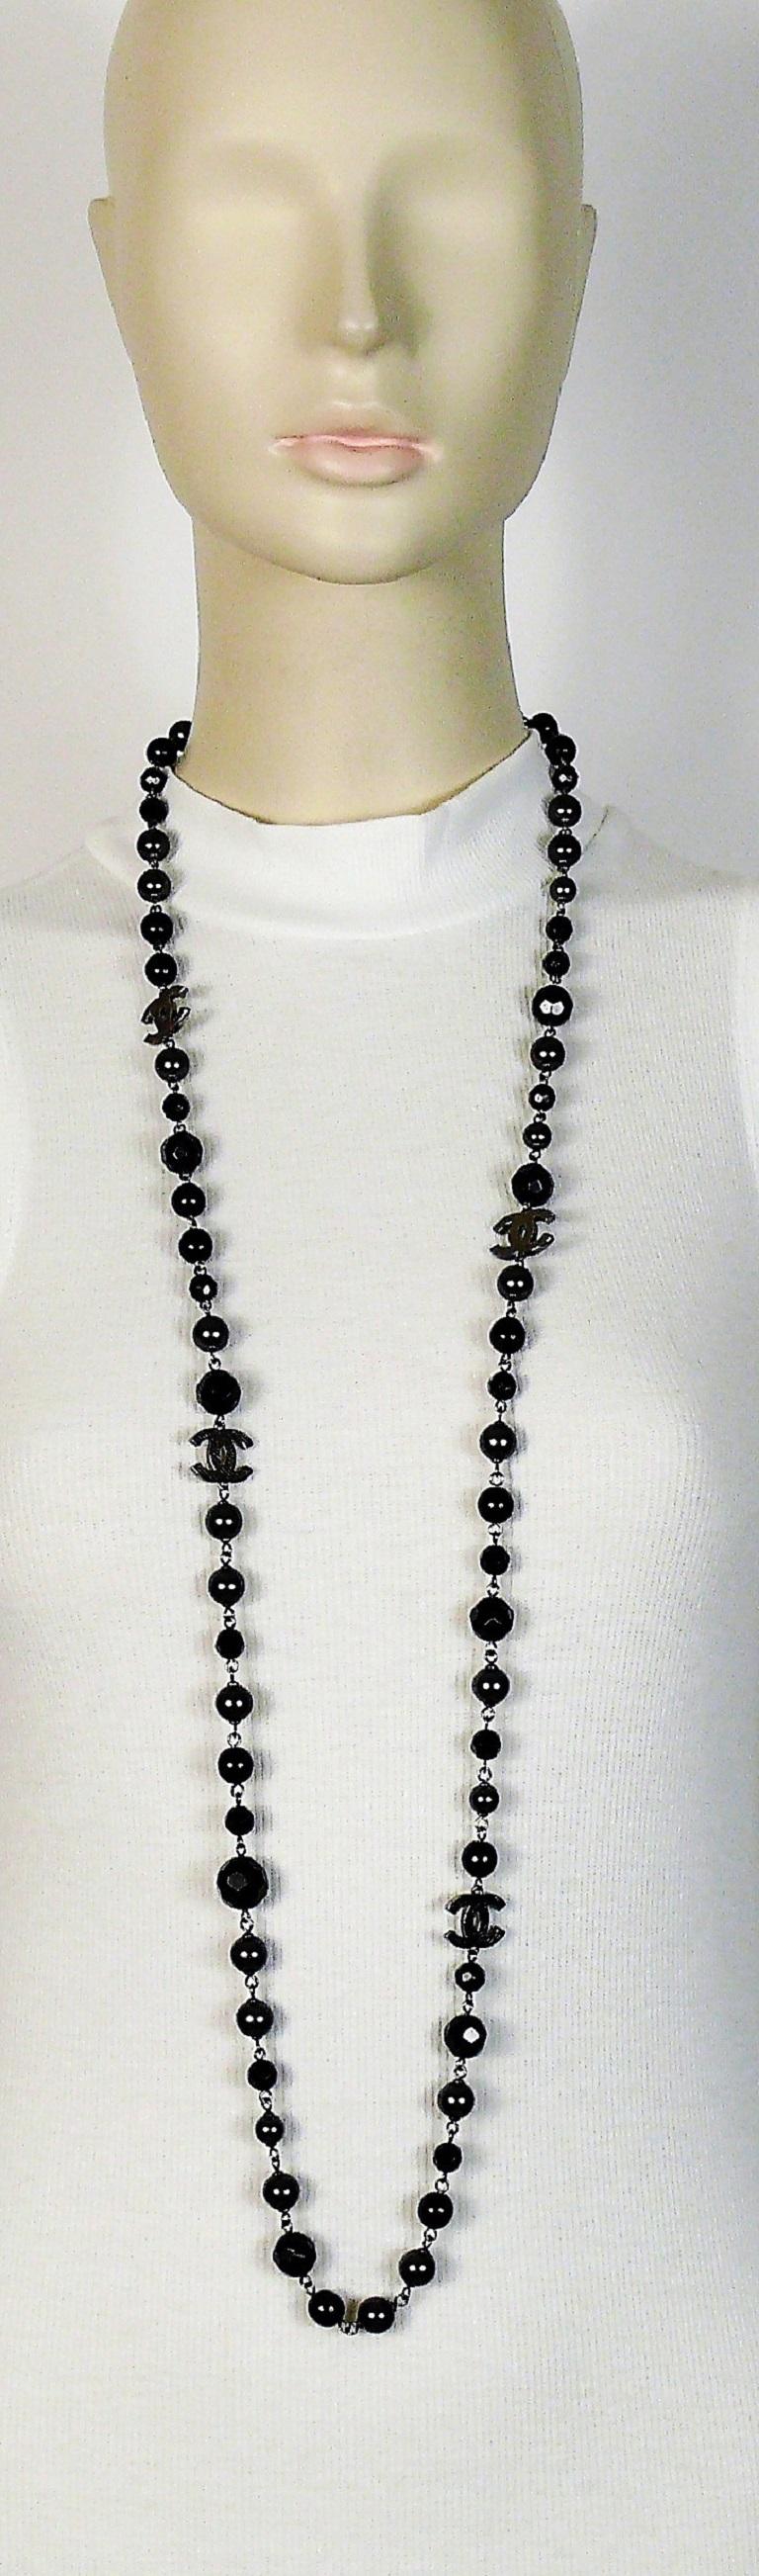 CHANEL necklace featuring a strand of black beads and grey faux pearls with four silver tone textured CHANEL logos.

This necklace can be wrapped two times around the neck.

Lobster clasp closure.

Embossed CHANEL A11 V  Made Made in